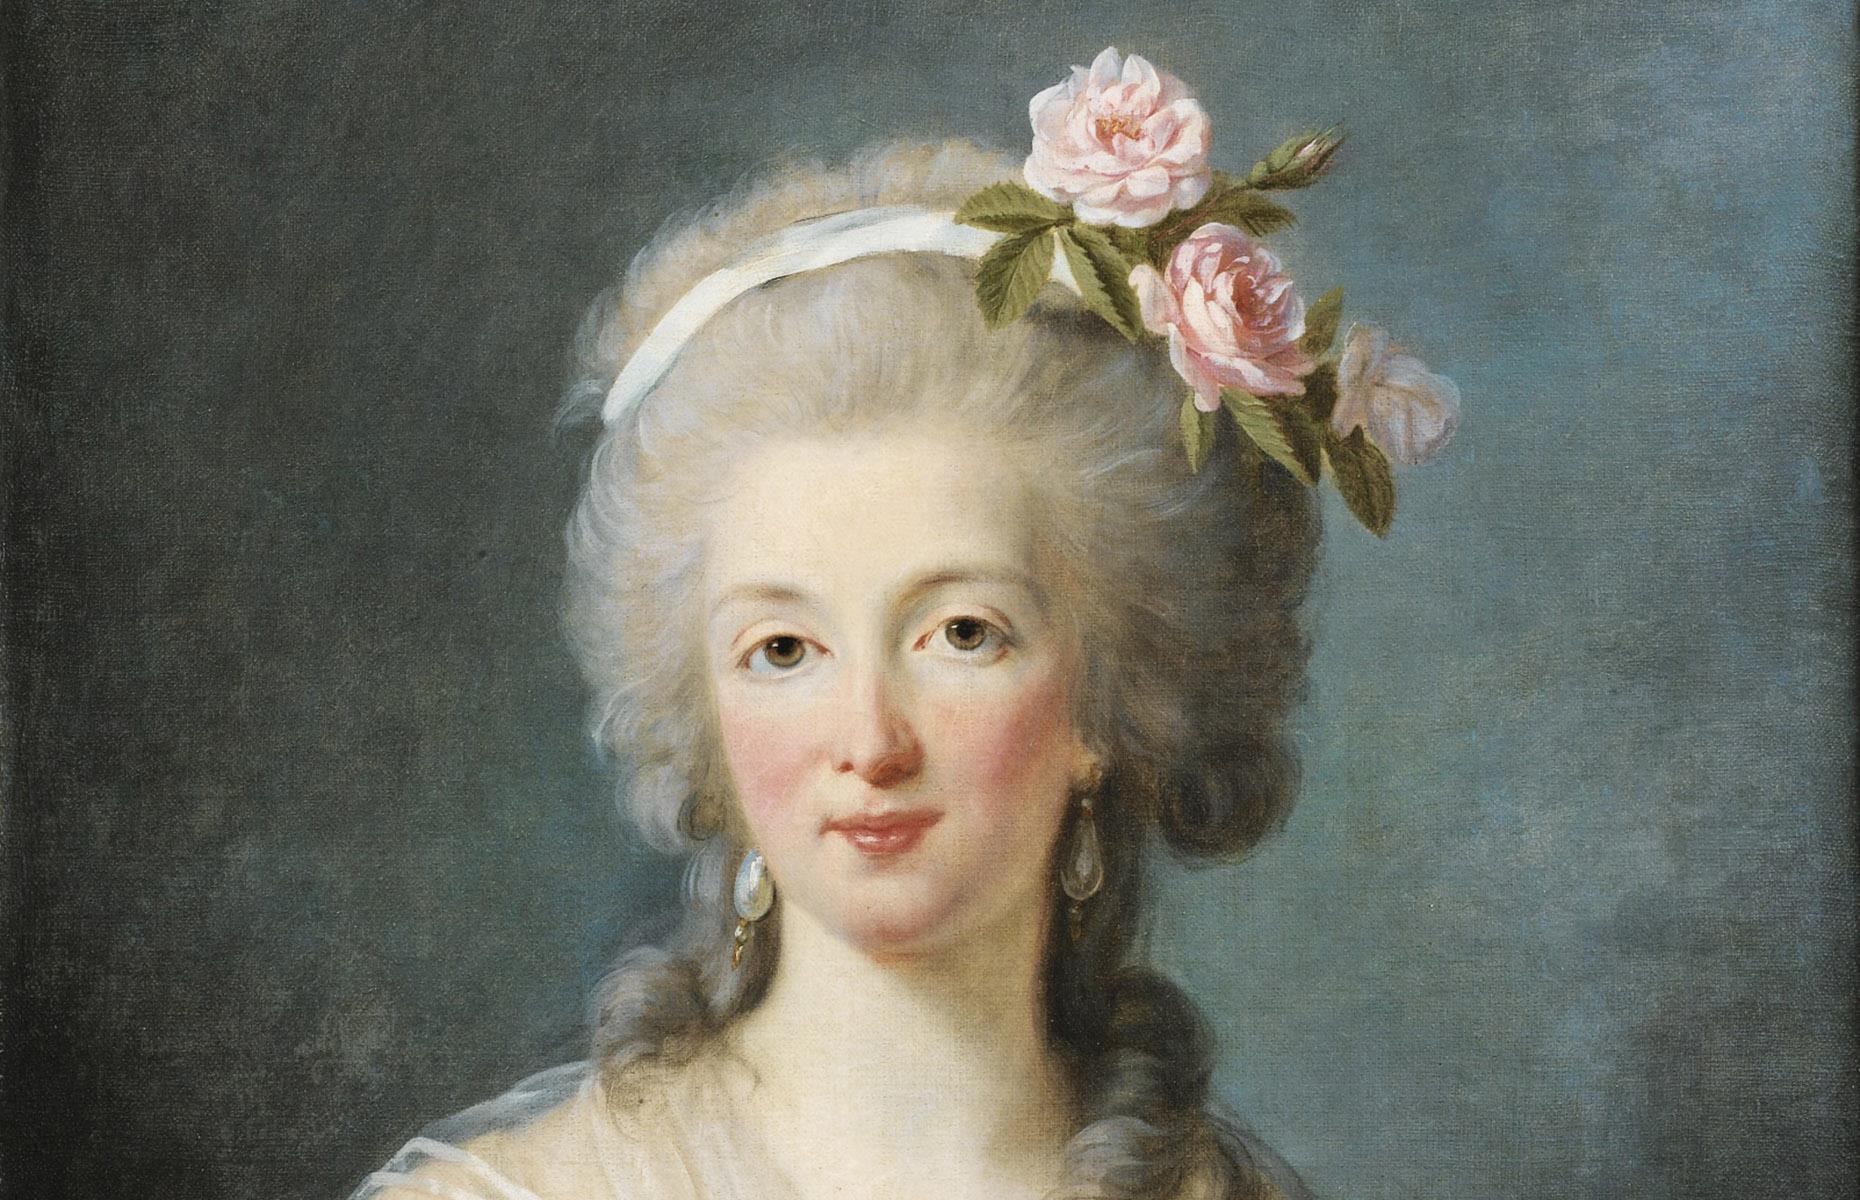 <p>A scheming social climber named Jeanne de Valois-Saint-Rémy (pictured) heard about the necklace and devised a cunning get-rich-quick scheme.</p>  <p>She forged Marie Antoinette's signature to fraudulently acquire the piece before disassembling it and selling its component parts on the black market.</p>  <p>The con artist was eventually caught and convicted of her crime. Marie Antoinette was proven innocent of any involvement, yet the scandal still tarnished her already precarious reputation, with many suspecting she'd obtained the necklace but refused to pay for it.</p>